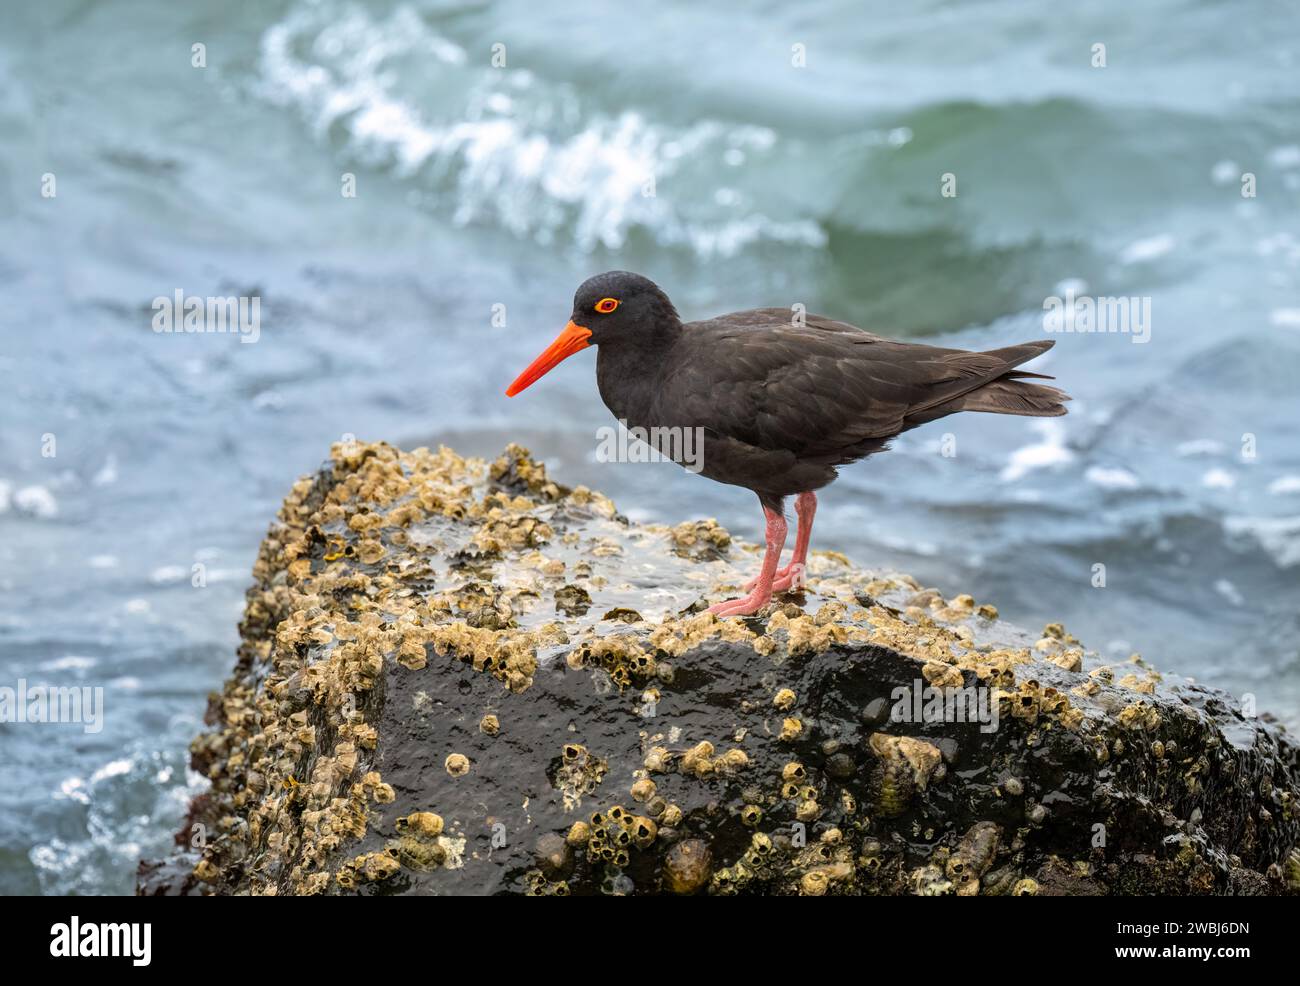 The Sooty Oystercatcher (Haematopus fuliginosus)  black shorebird with a long orange-red bill, red eyes and stout red-pink legs. Stock Photo